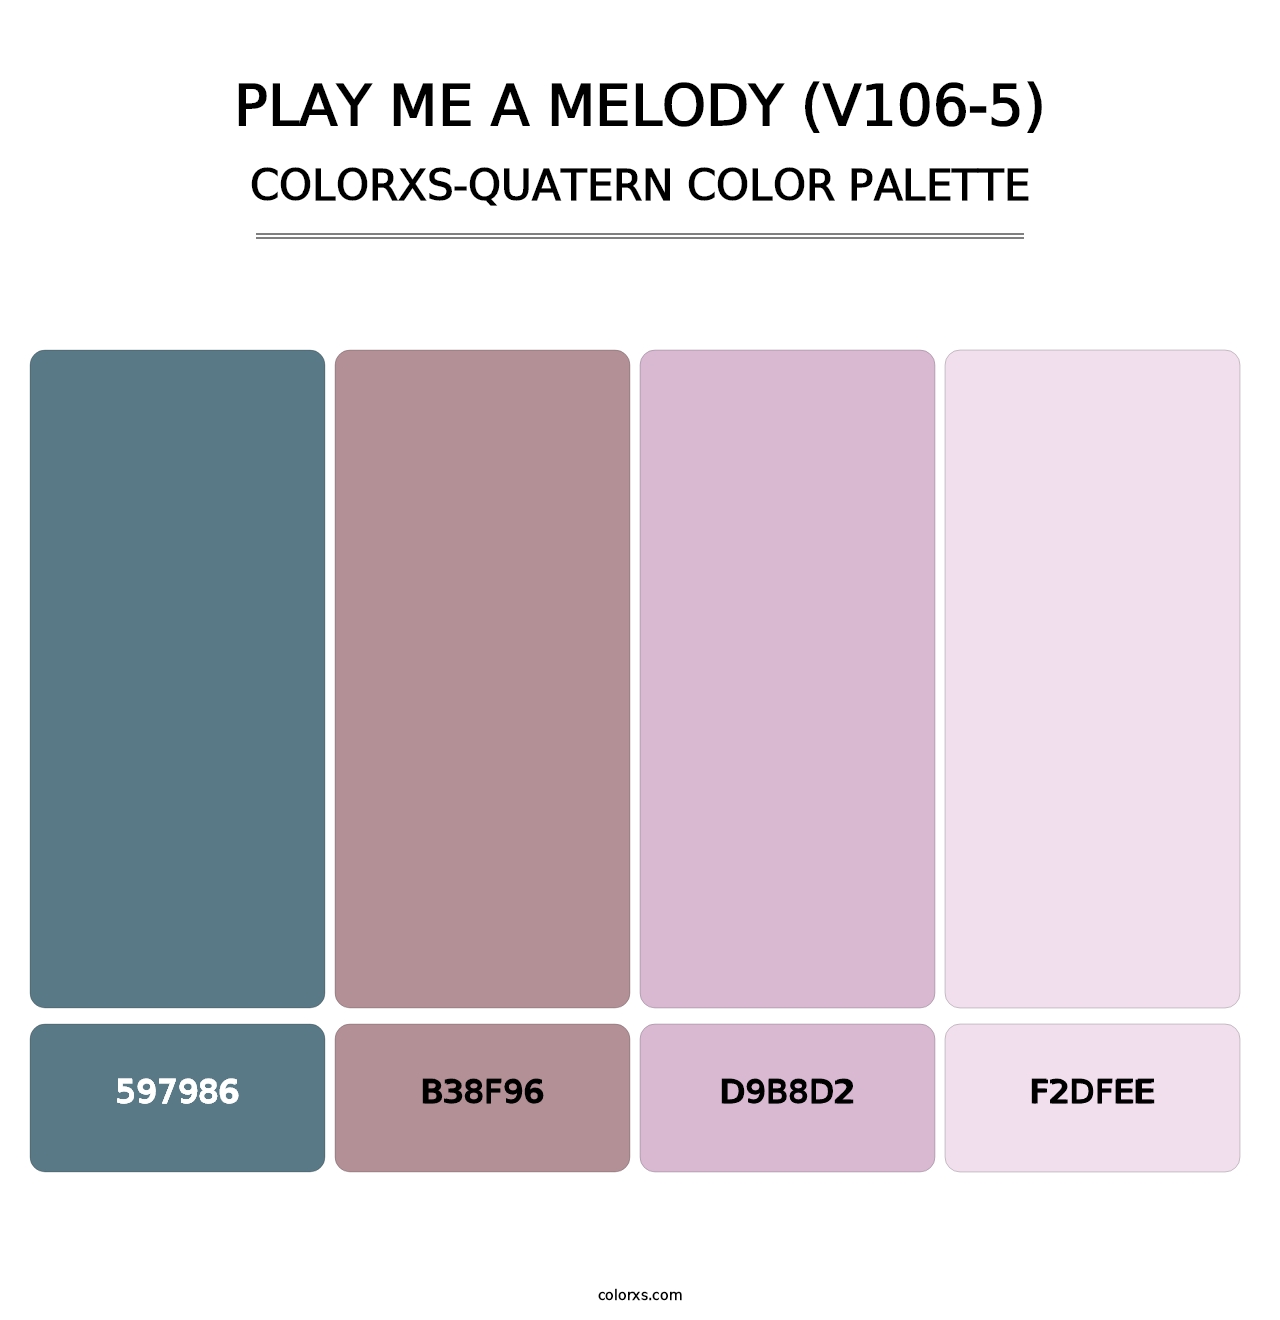 Play Me a Melody (V106-5) - Colorxs Quatern Palette